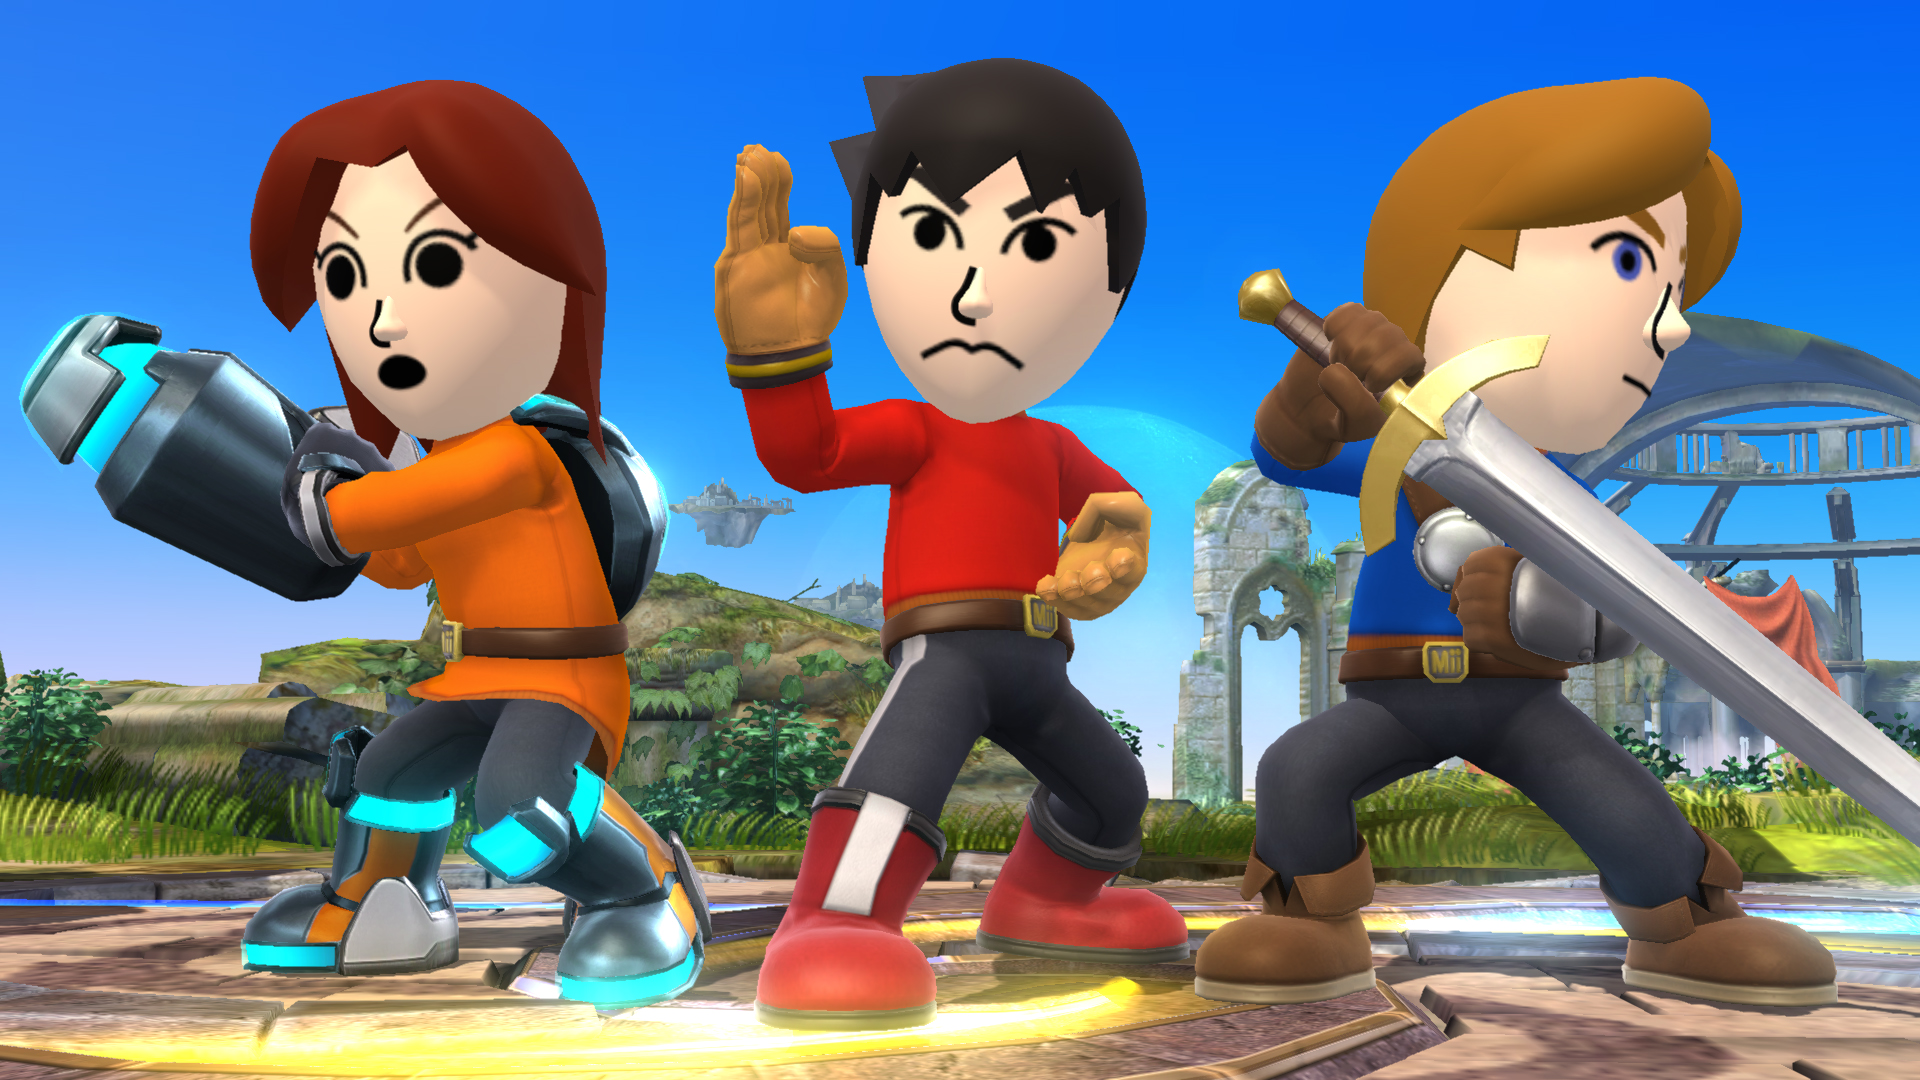 Geek insider, geekinsider, geekinsider. Com,, challenger approaching: mii fighters announced for super smash bros. , gaming